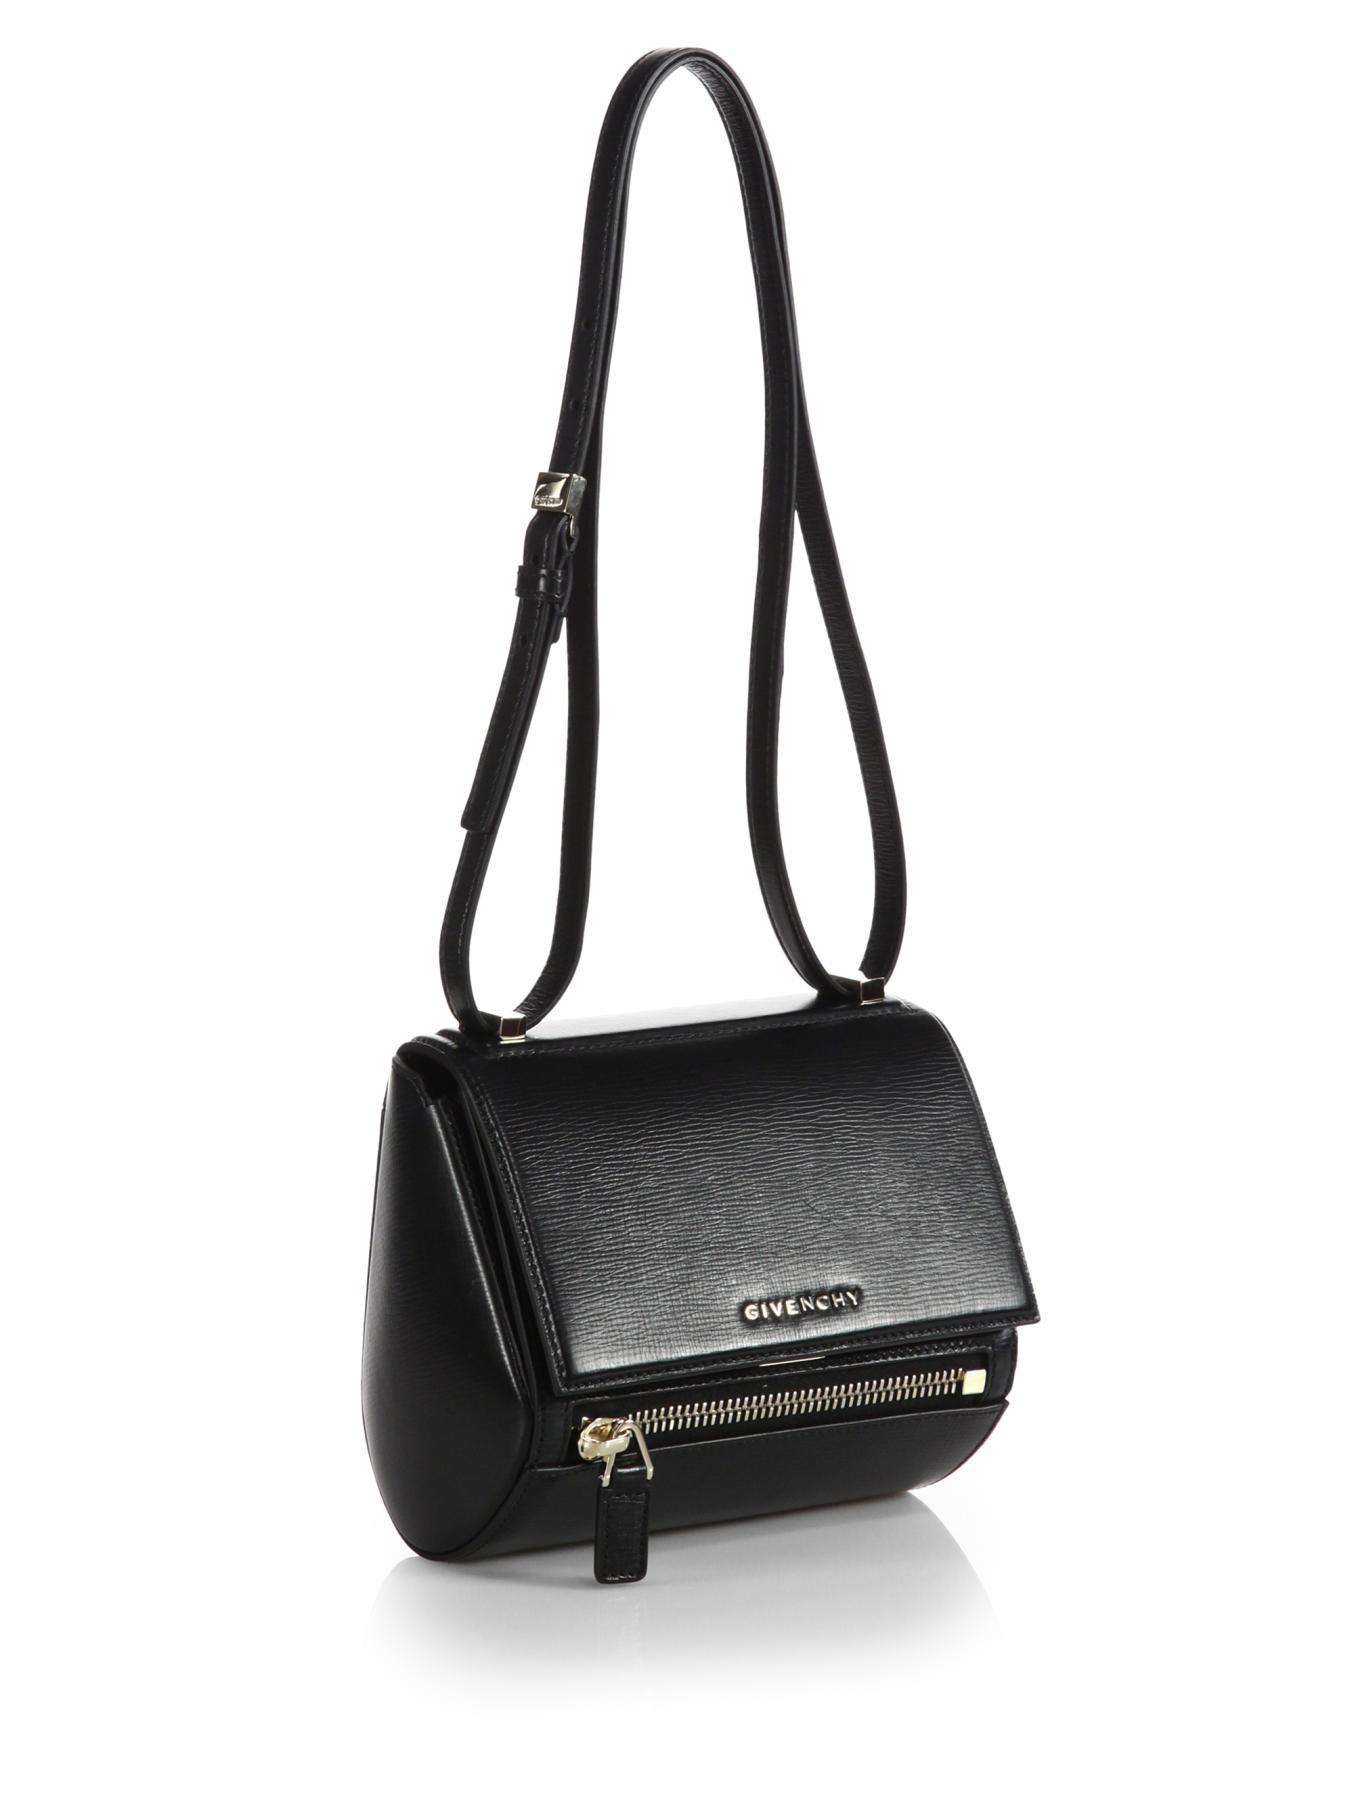 Black Pandora small grained-leather cross-body bag, Givenchy